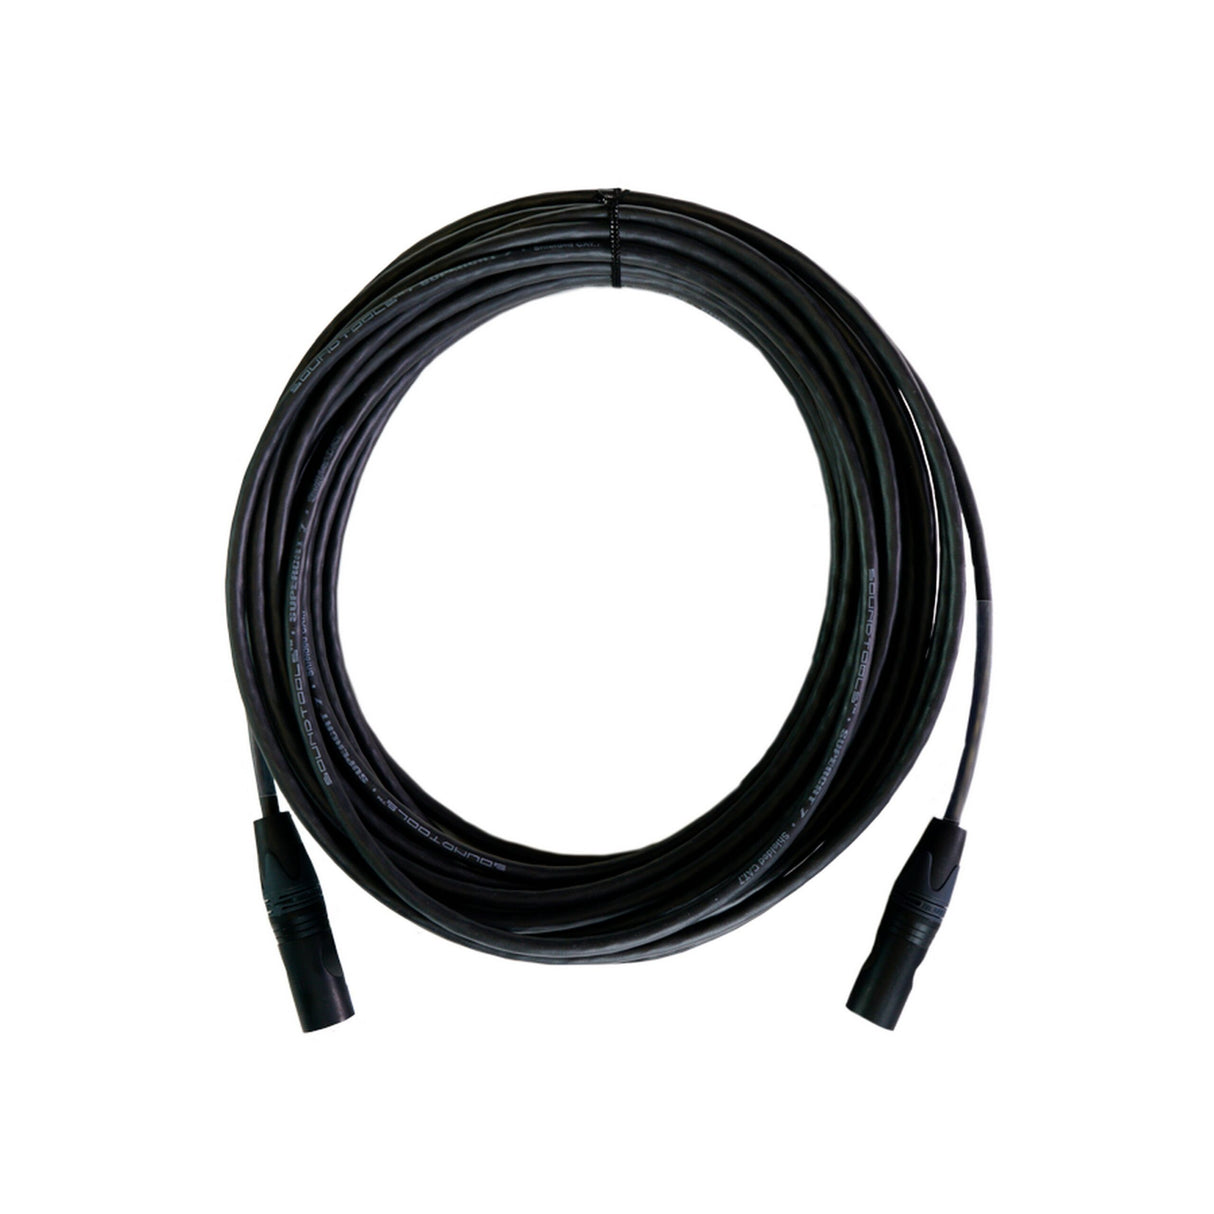 SoundTools SuperCAT 7 etherCON to etherCON CAT 7 Cable, 200-Foot Black